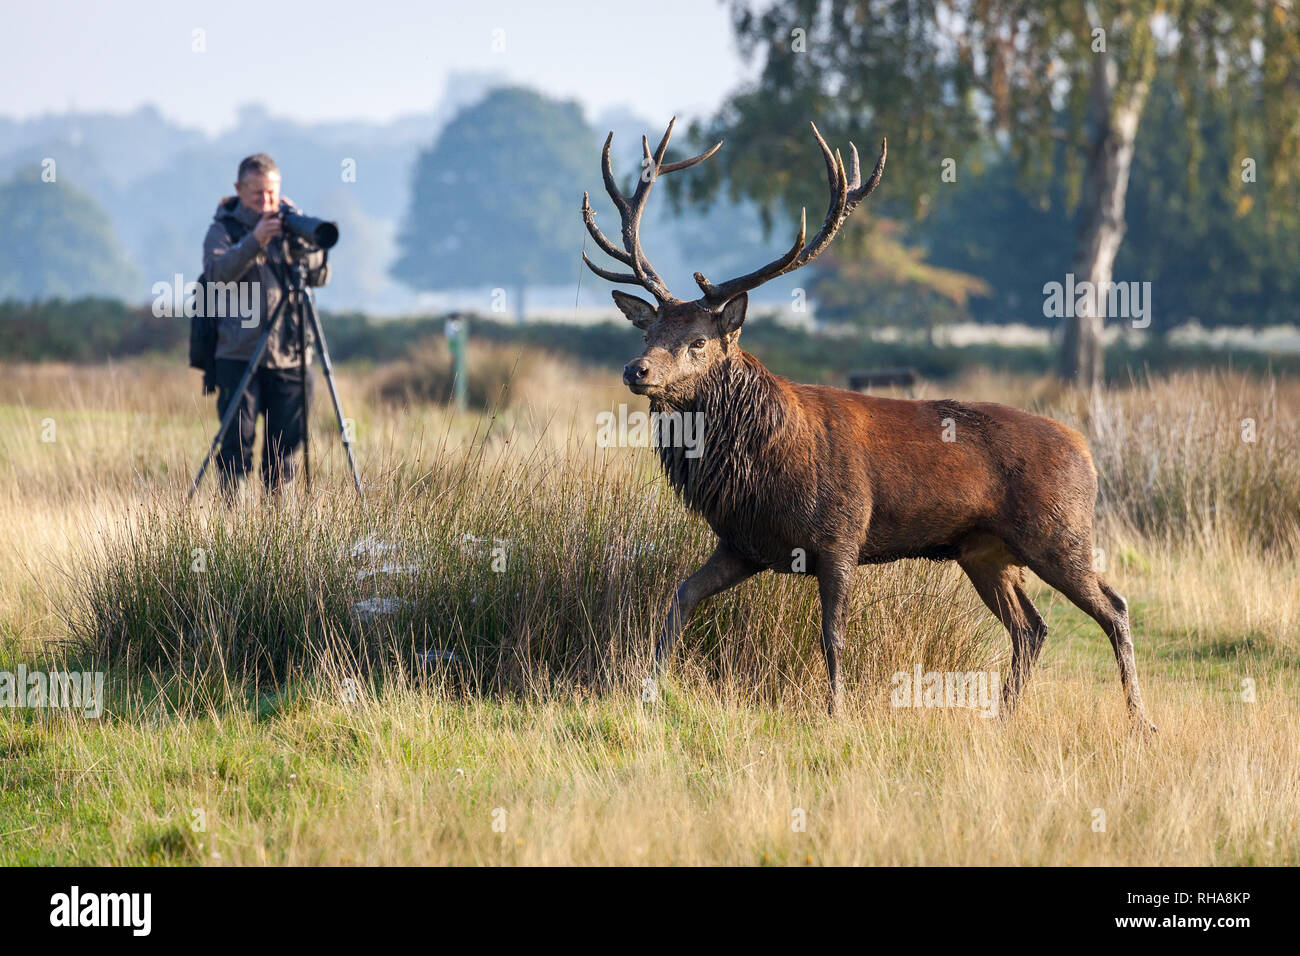 Male photographer taking picture of red deer (Cervus elaphus) stag in Richmond Park, London, England, UK Stock Photo